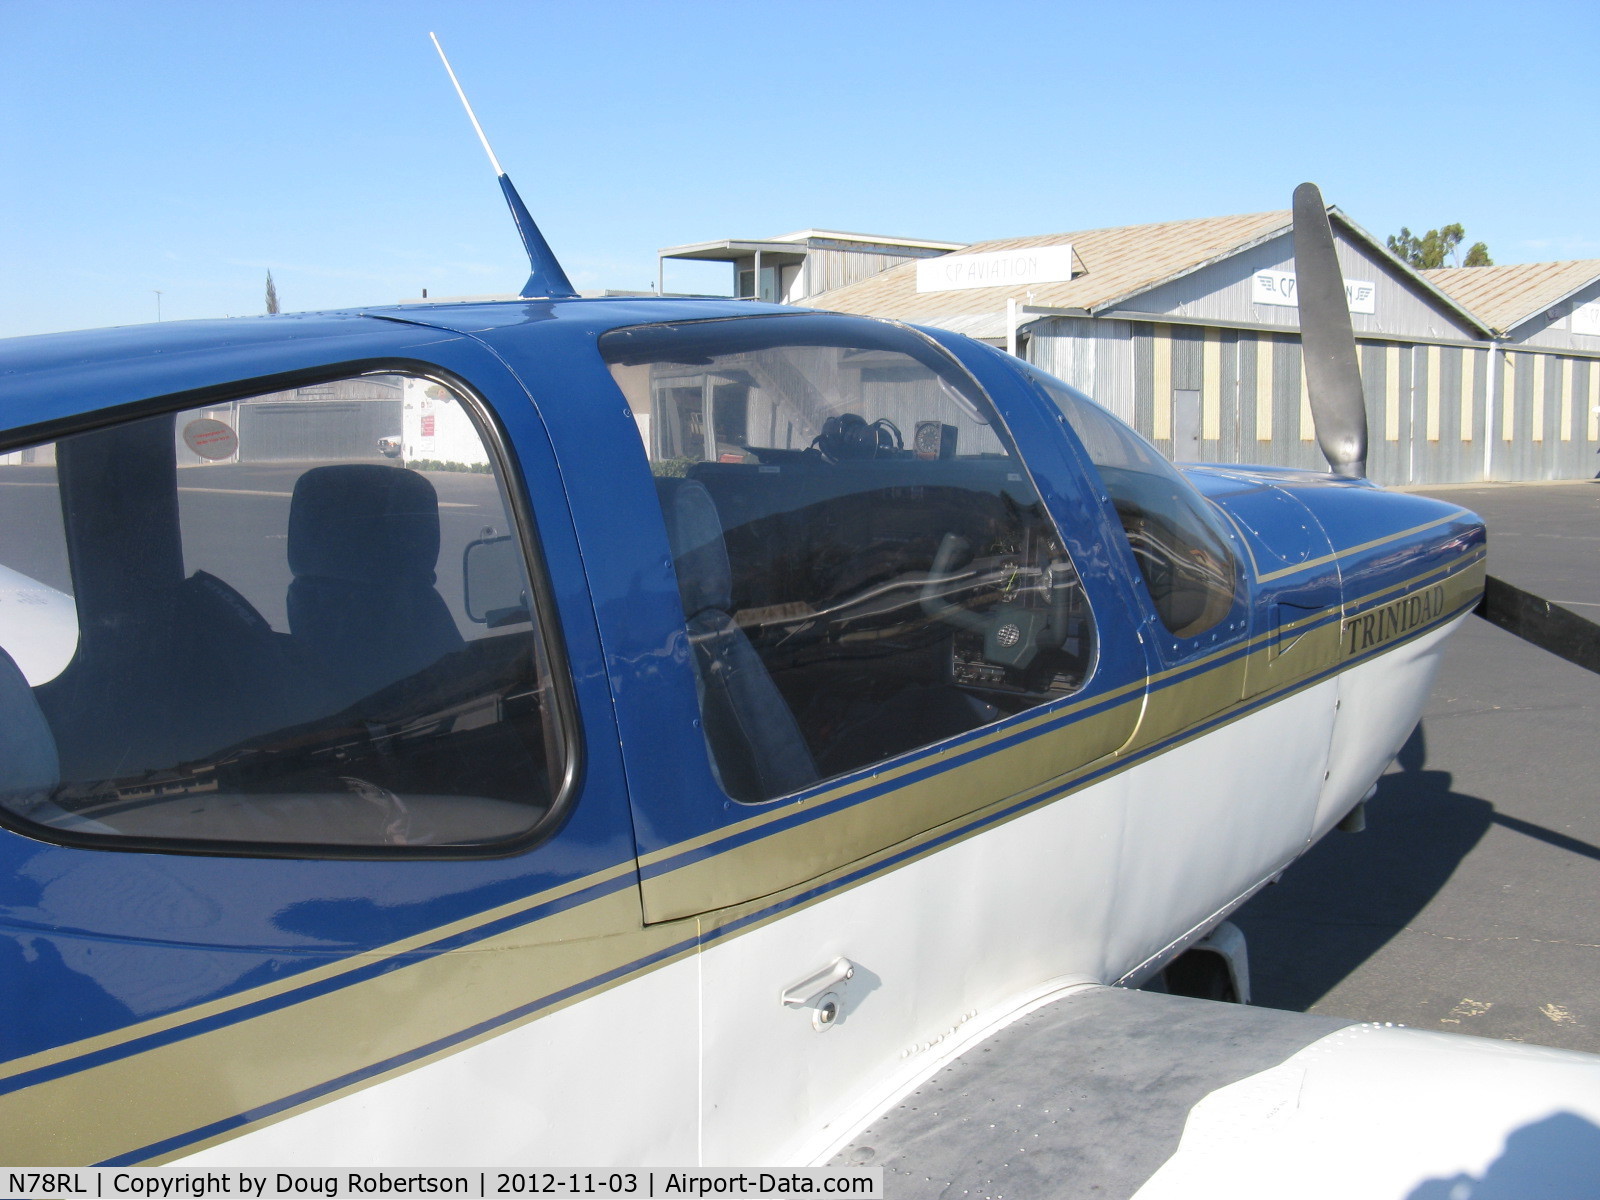 N78RL, 1984 Socata TB-20 Trinidad C/N 447, 1984 SOCATA TB-20 TRINIDAD, Lycoming IO-540-C4D5D 250 Hp, large 4/5 place cabin with excellent visibility, max. level speed 168 kts. 193 mph.